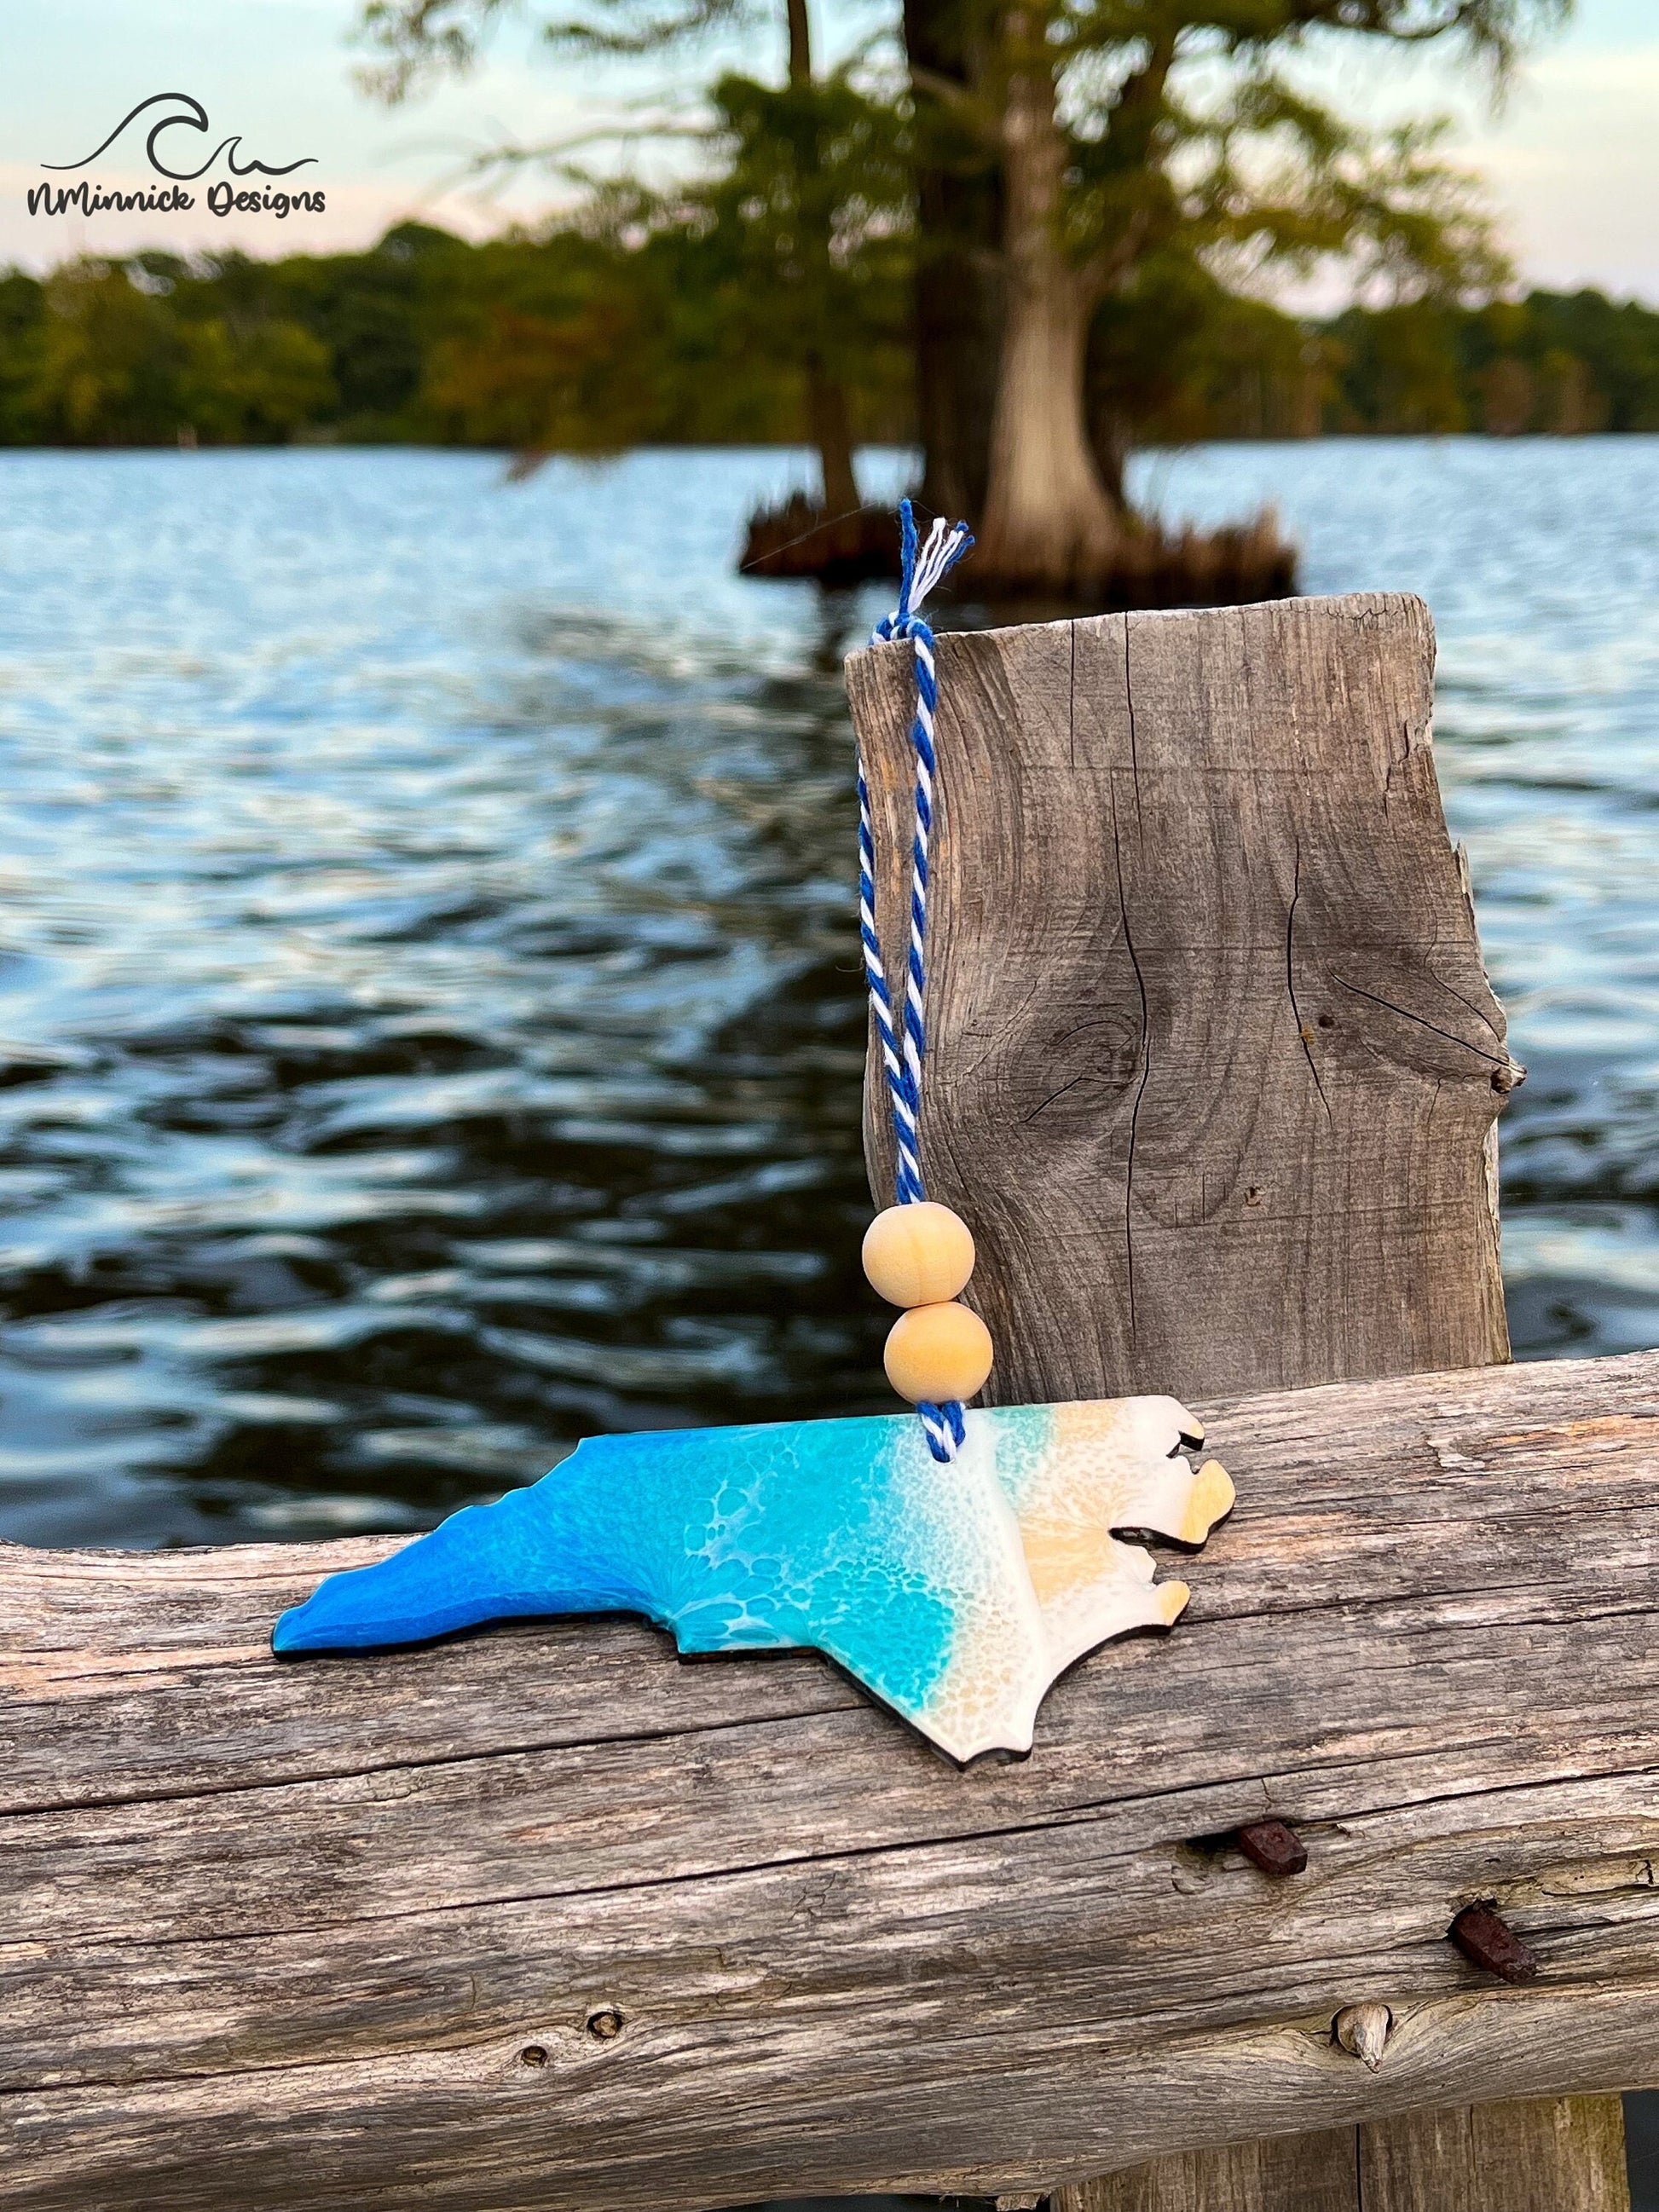 North Carolina-shaped wooden Christmas ornament covered in blue and teal colored ocean resin art resembling the waves along North Carolina&#39;s Atlantic Coast. Finished with blue and white baker&#39;s twine and two wooden beads.